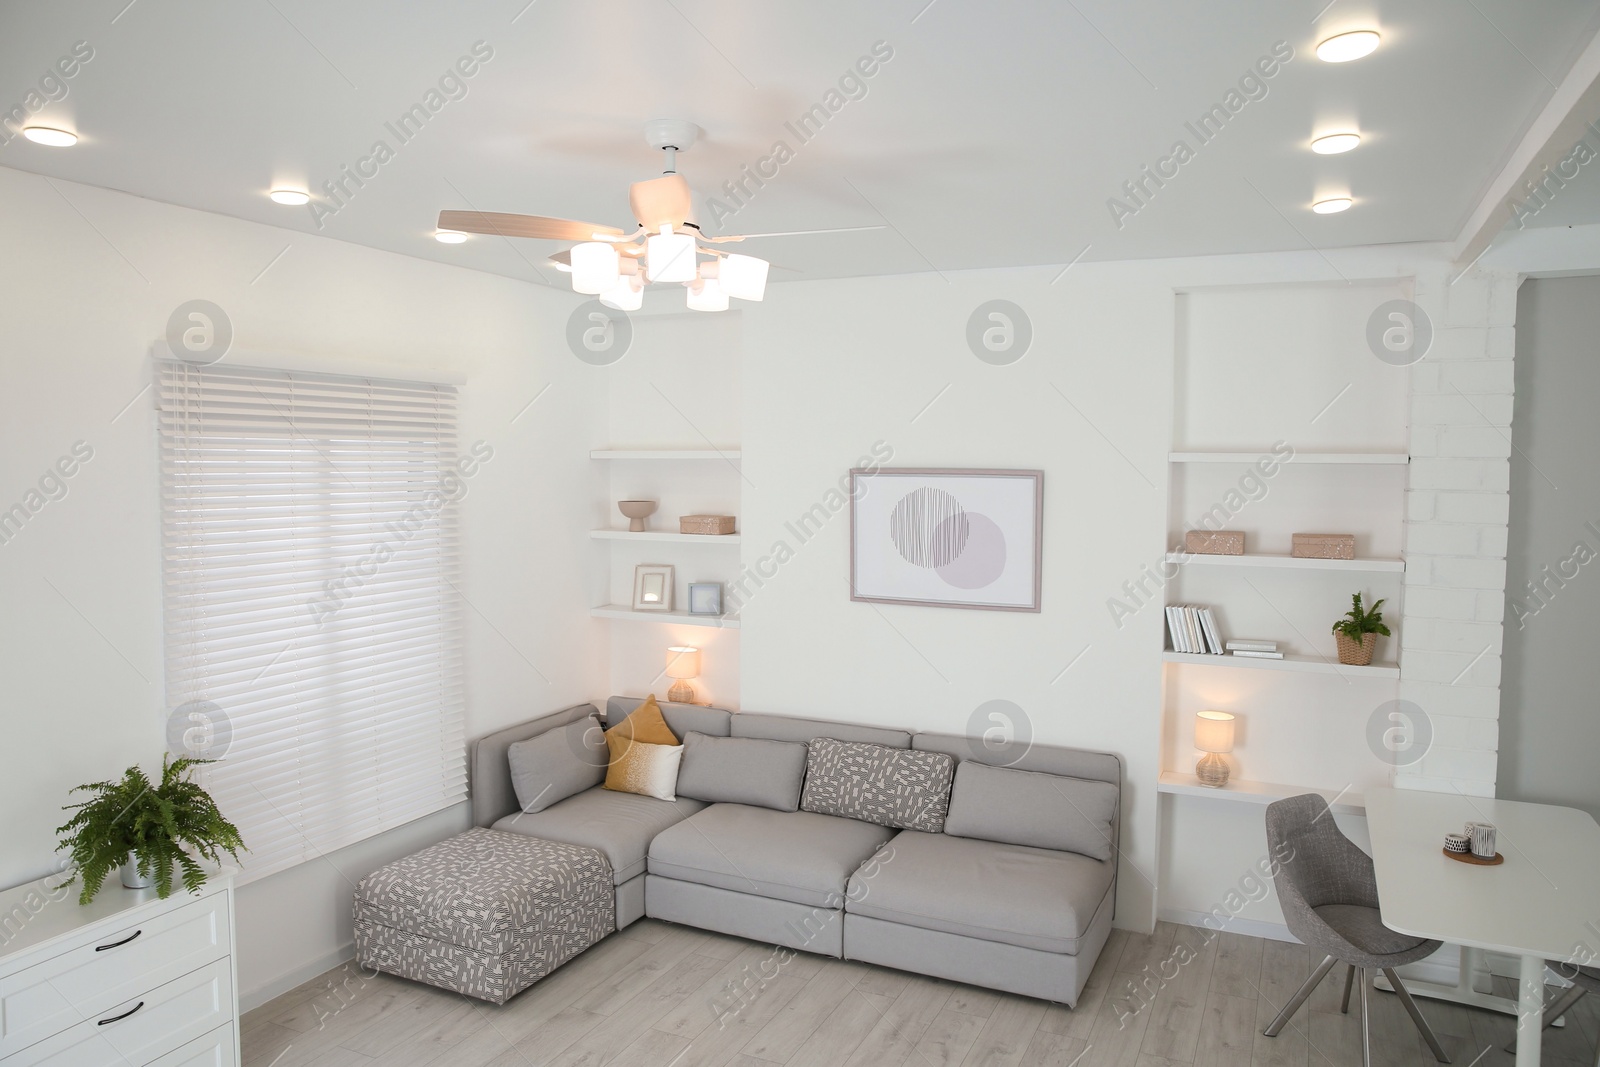 Photo of Ceiling fan, furniture and accessories in stylish living room, above view